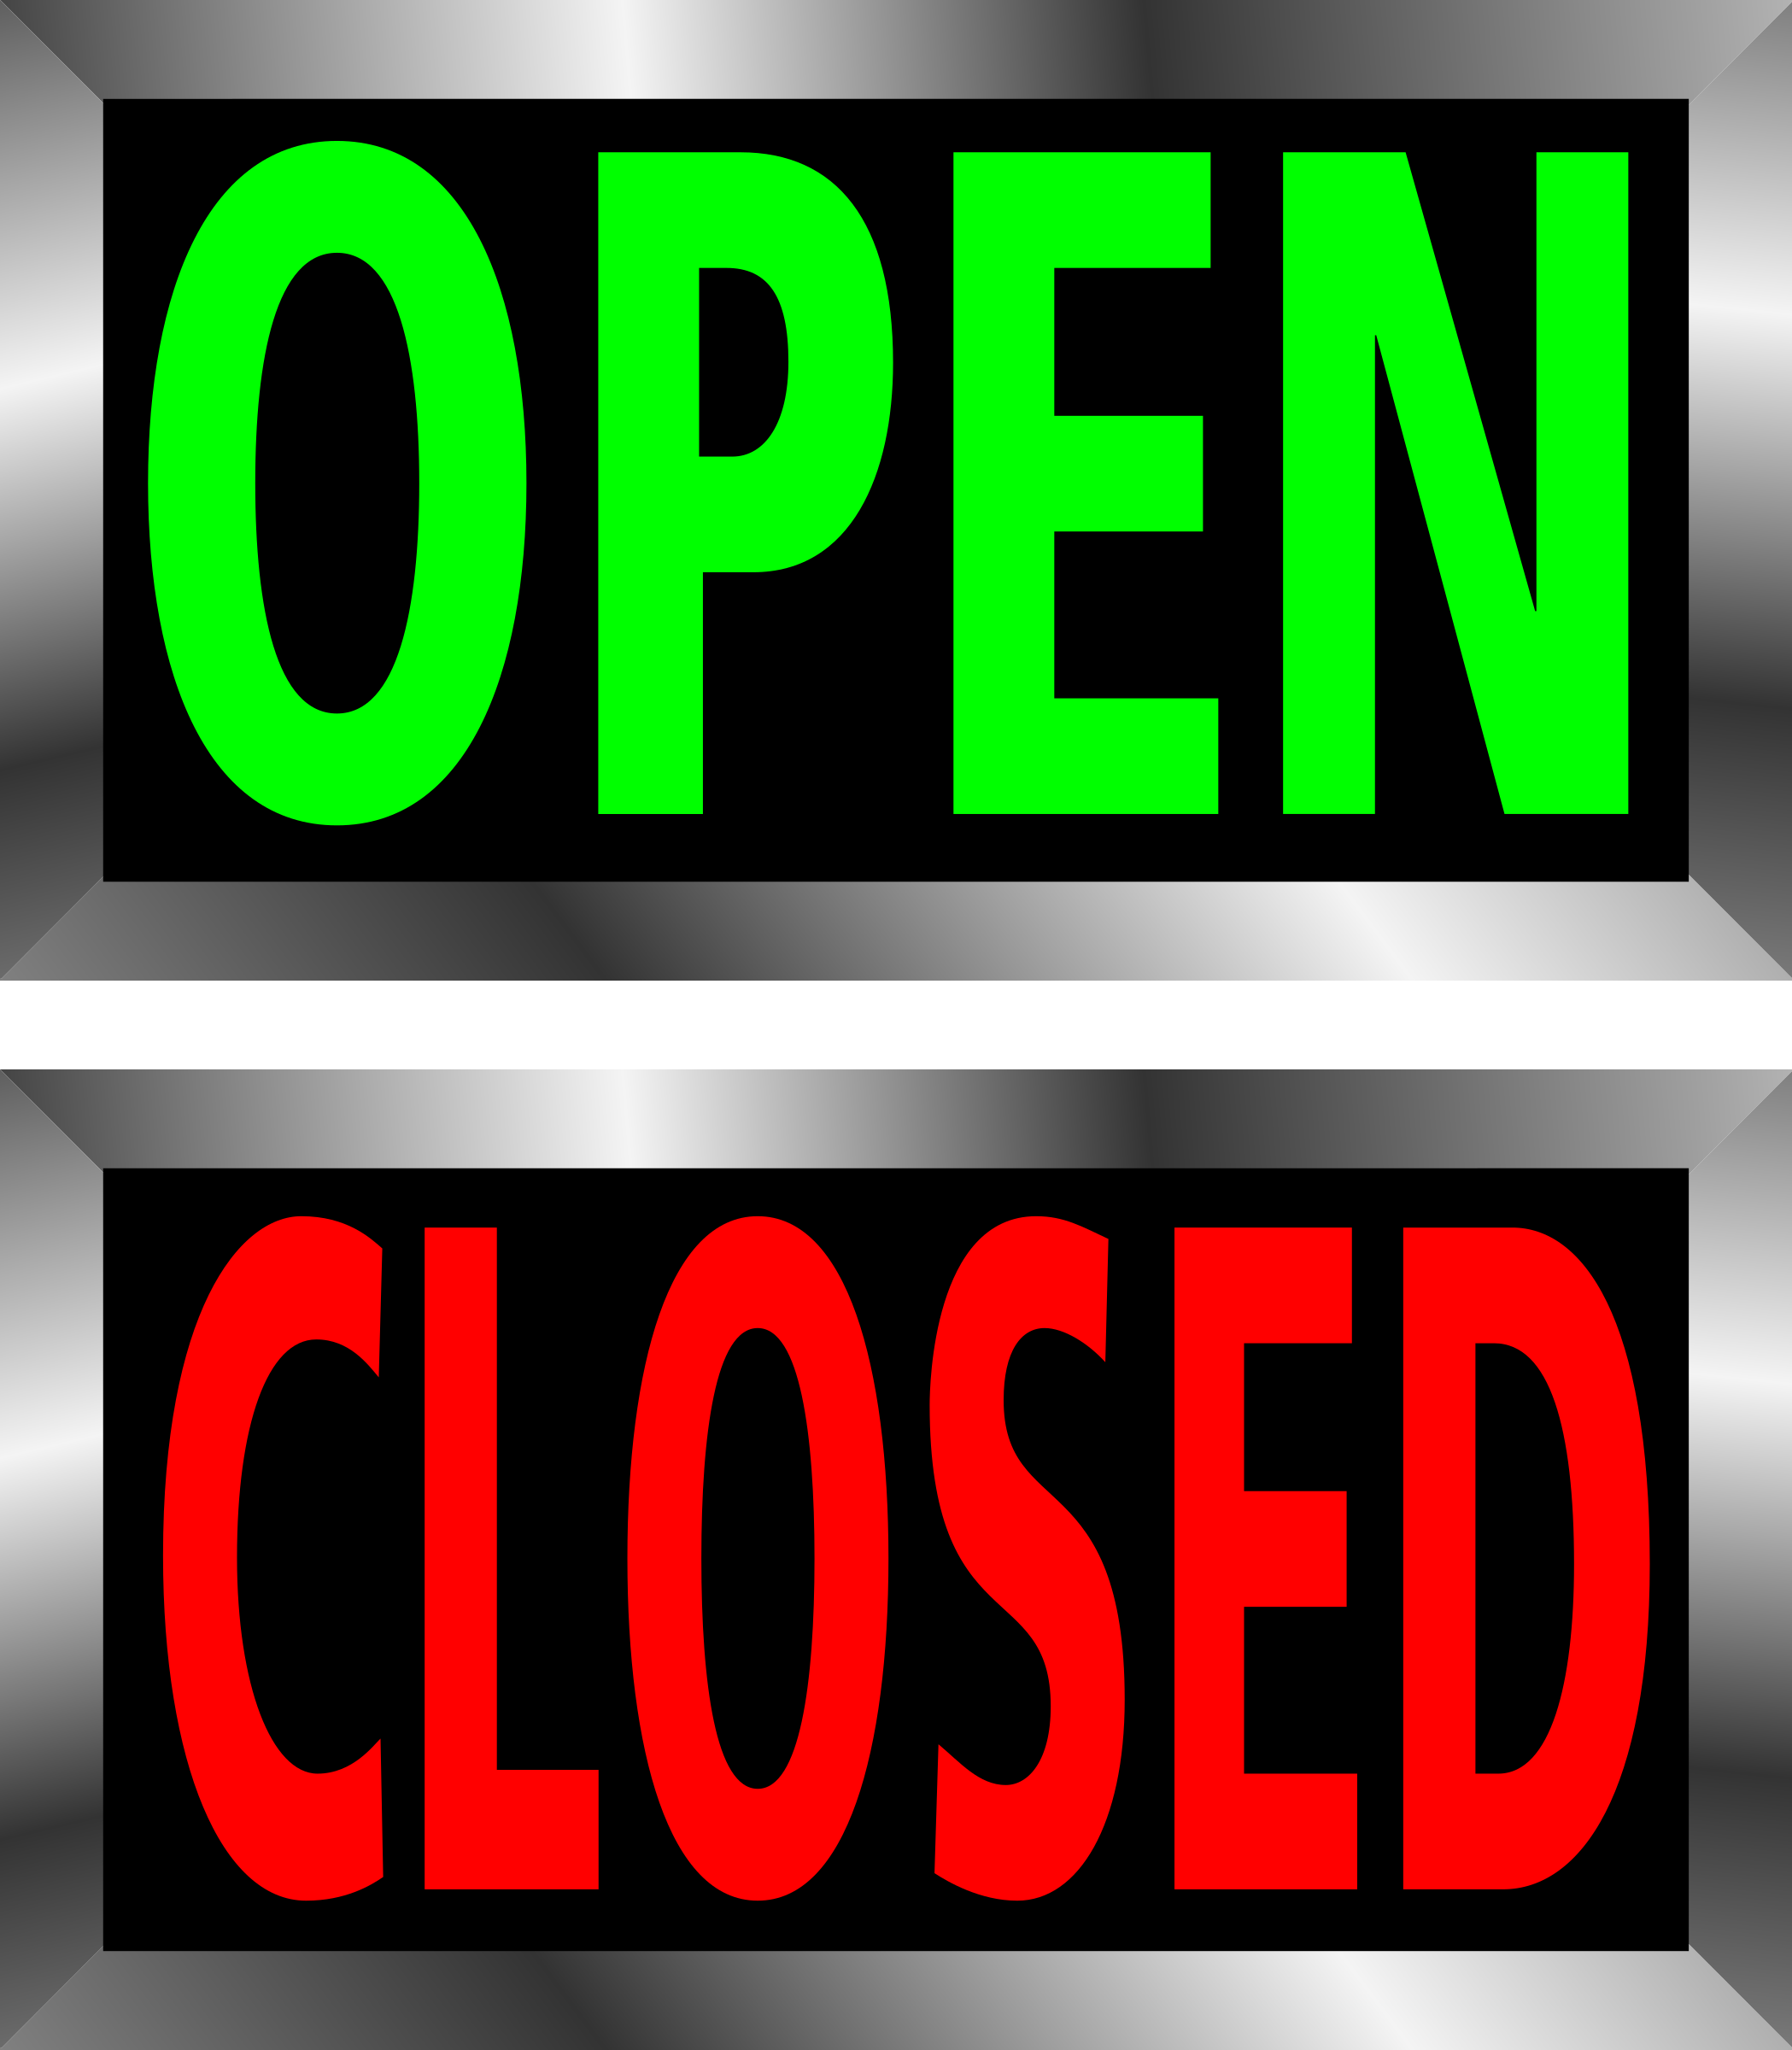 Clipart - Open and Closed signs